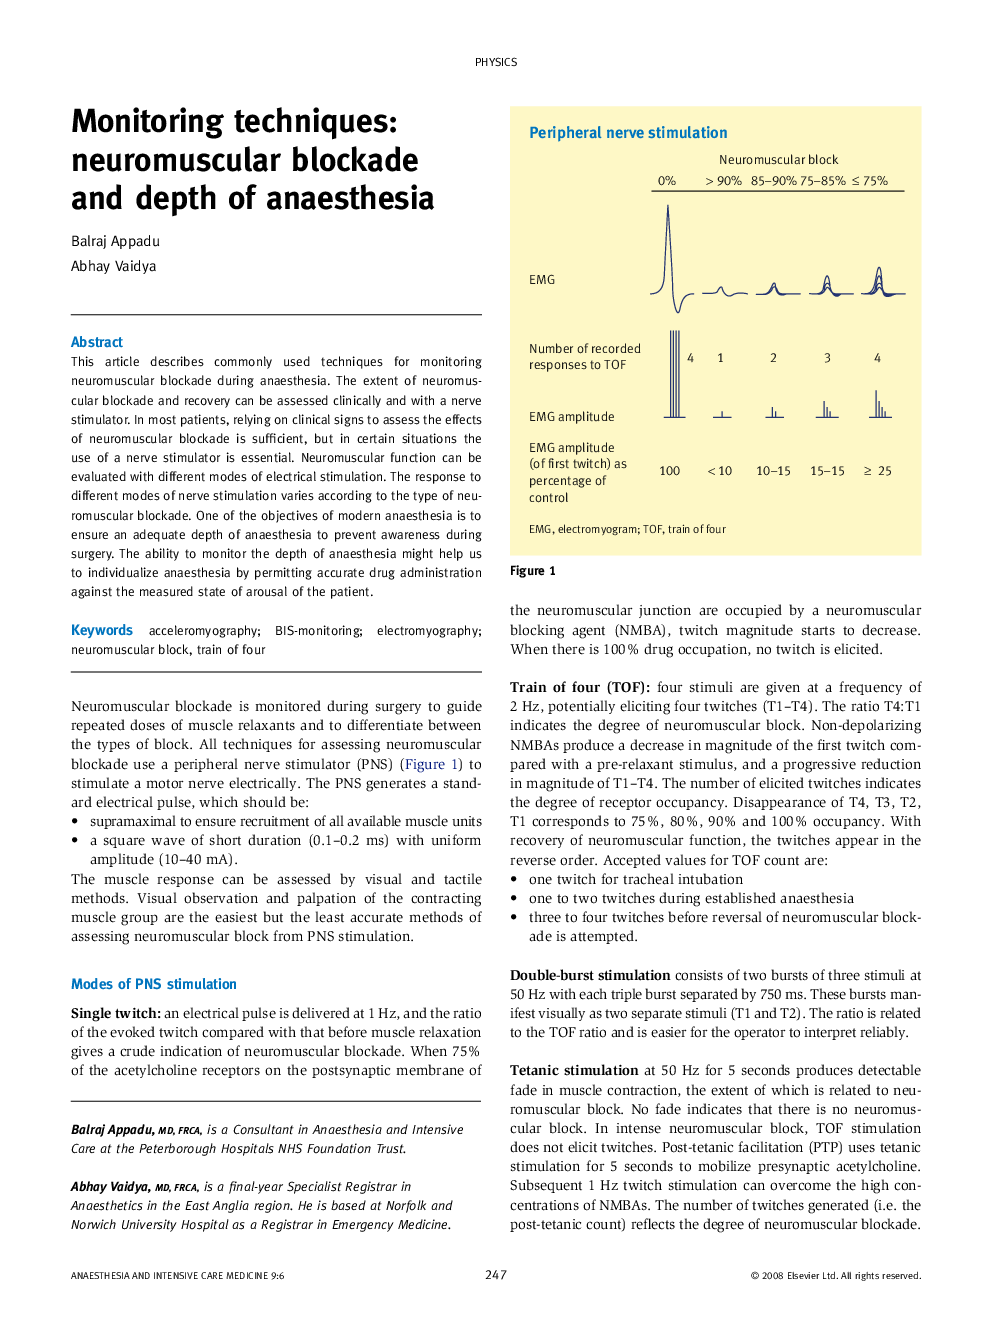 Monitoring techniques: neuromuscular blockade and depth of anaesthesia